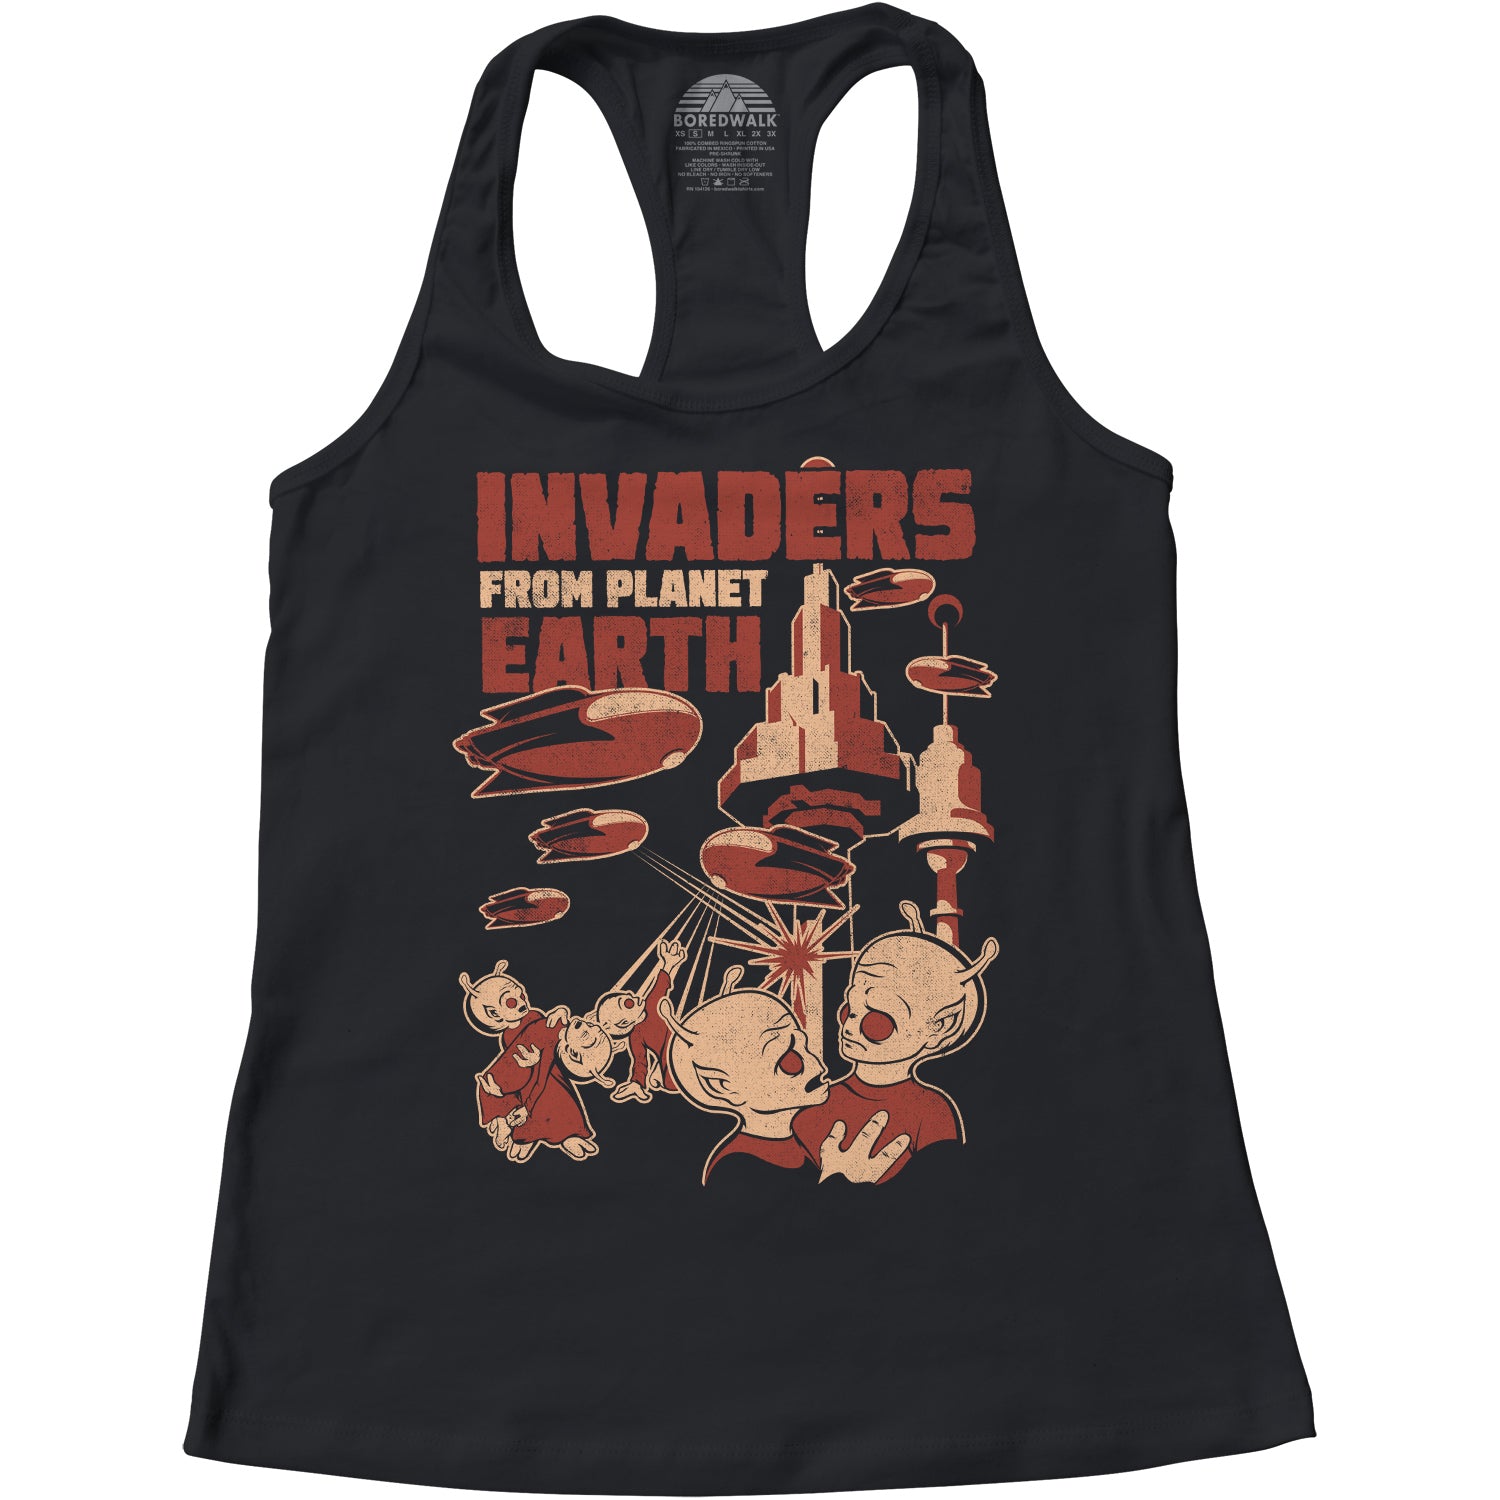 Women's Invaders From Earth Racerback Tank Top